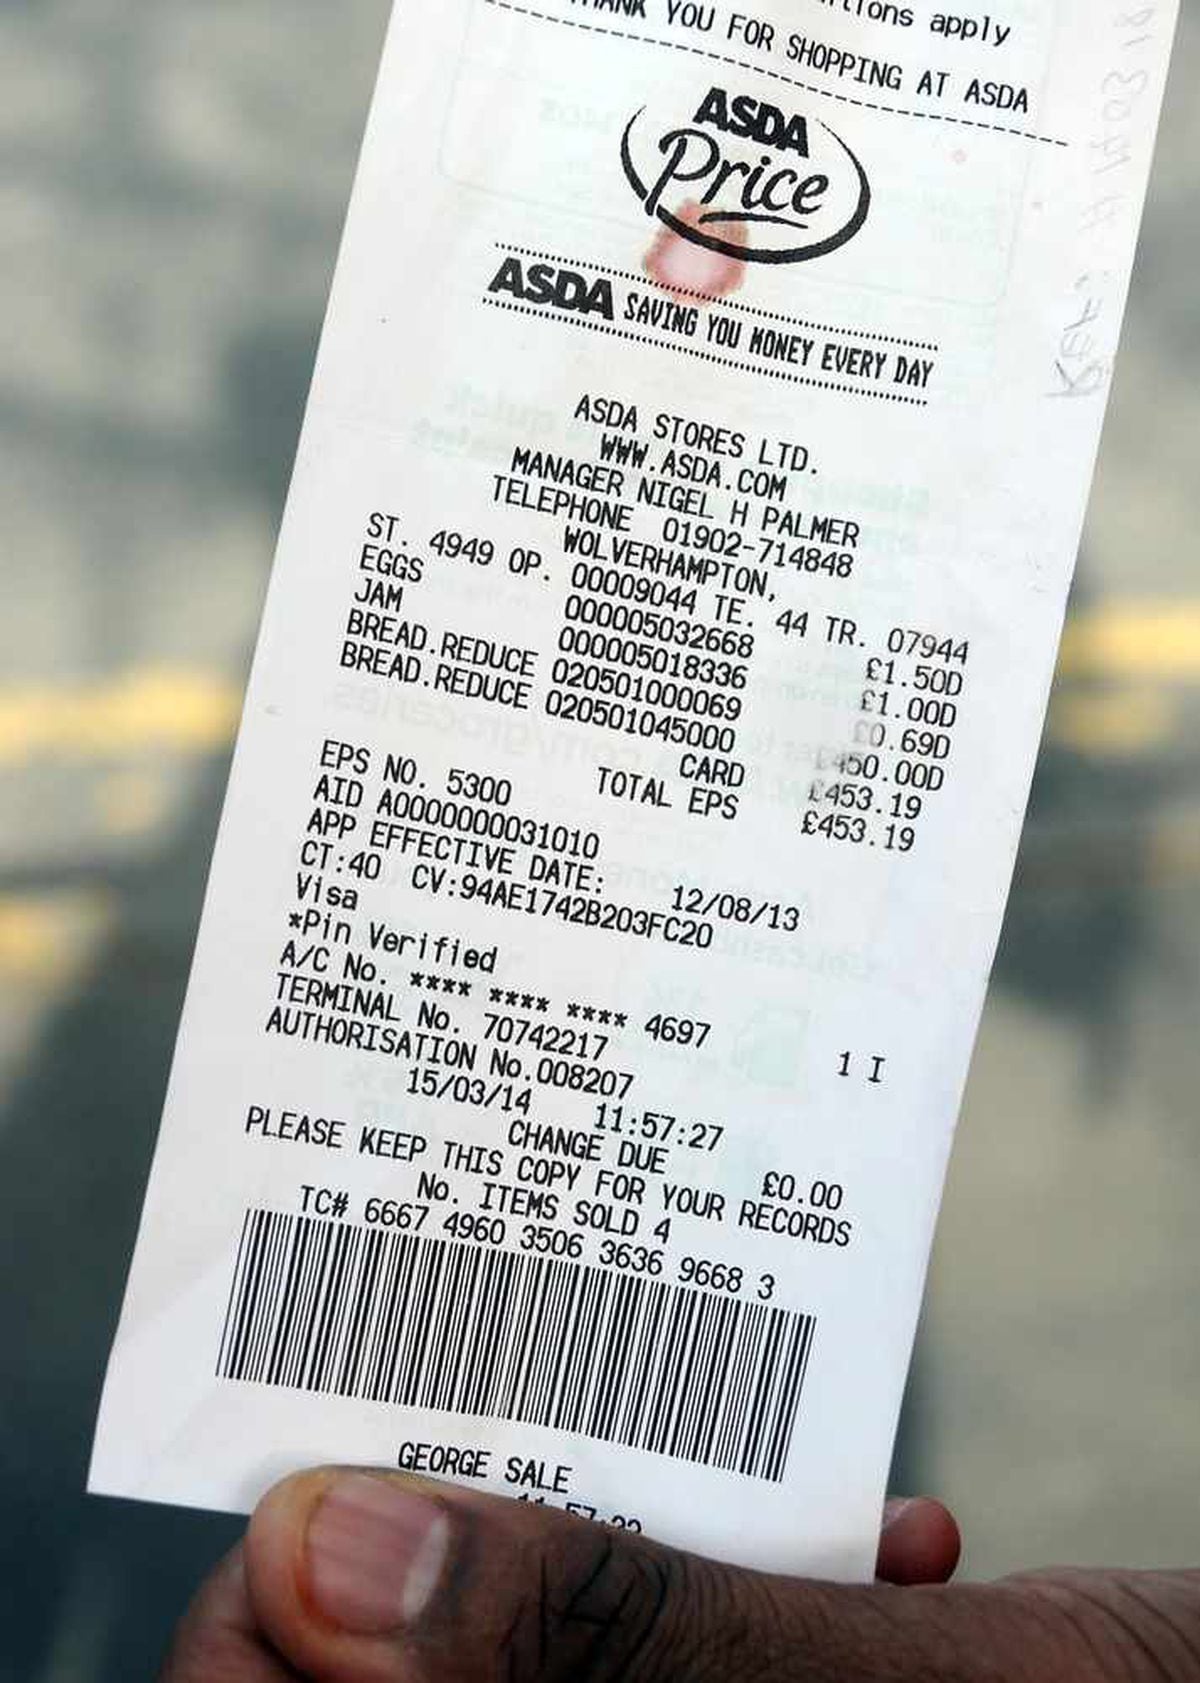 The receipt showing the mistake in price for bread